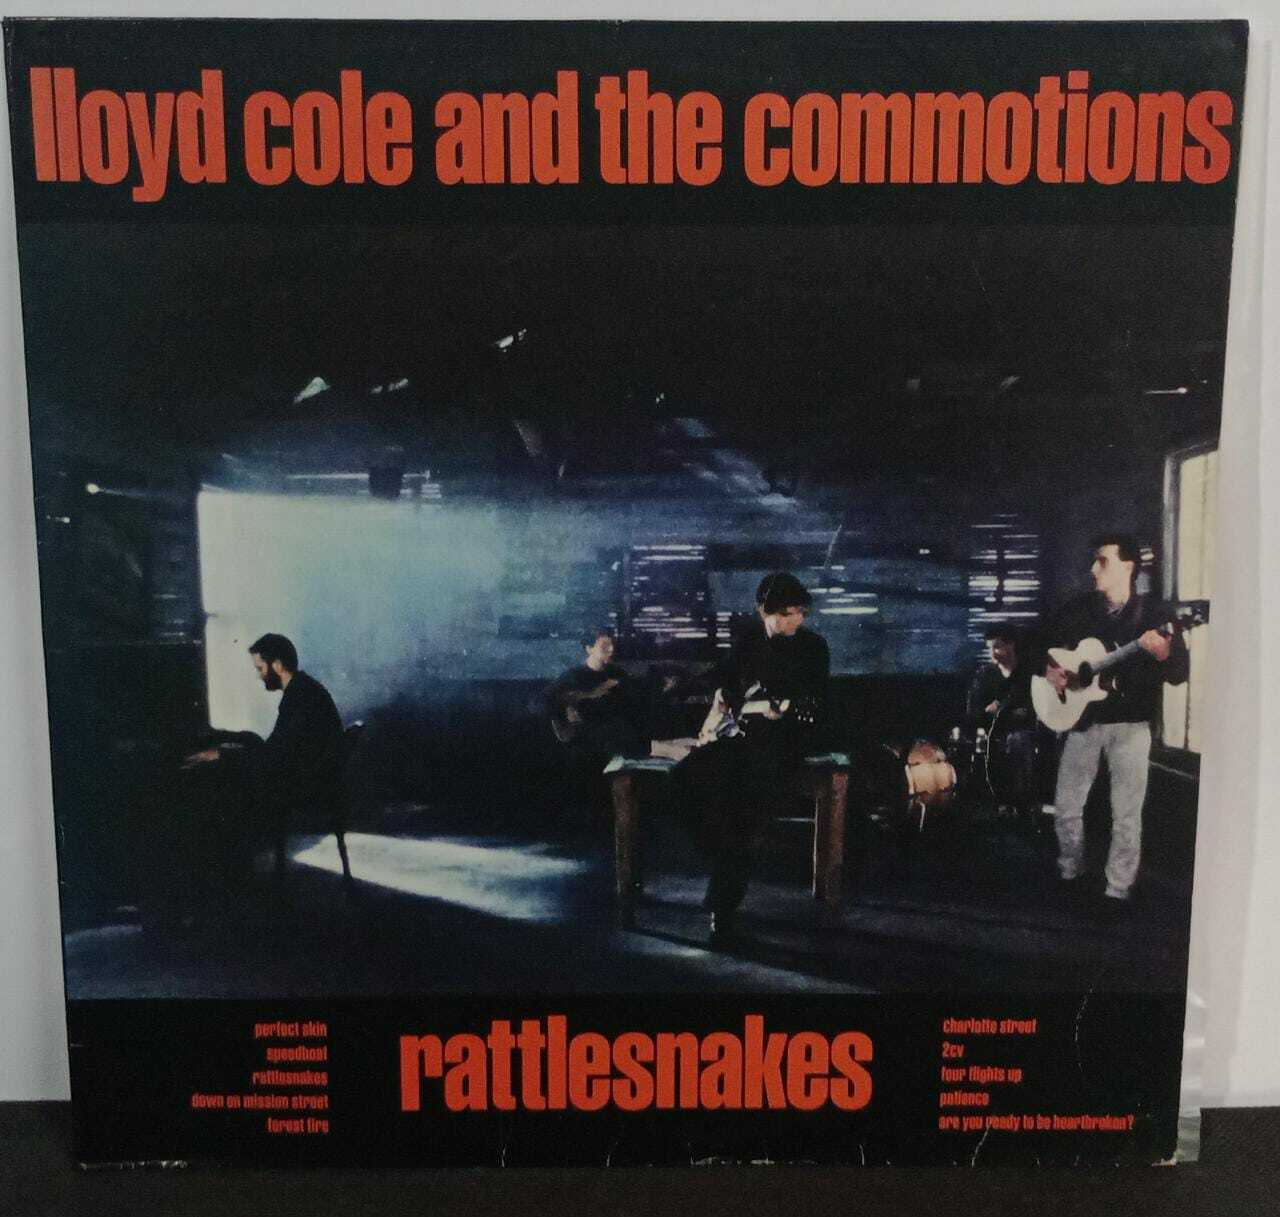 Vinil - Lloyd Cole and the Commotions - Rattlesnakes